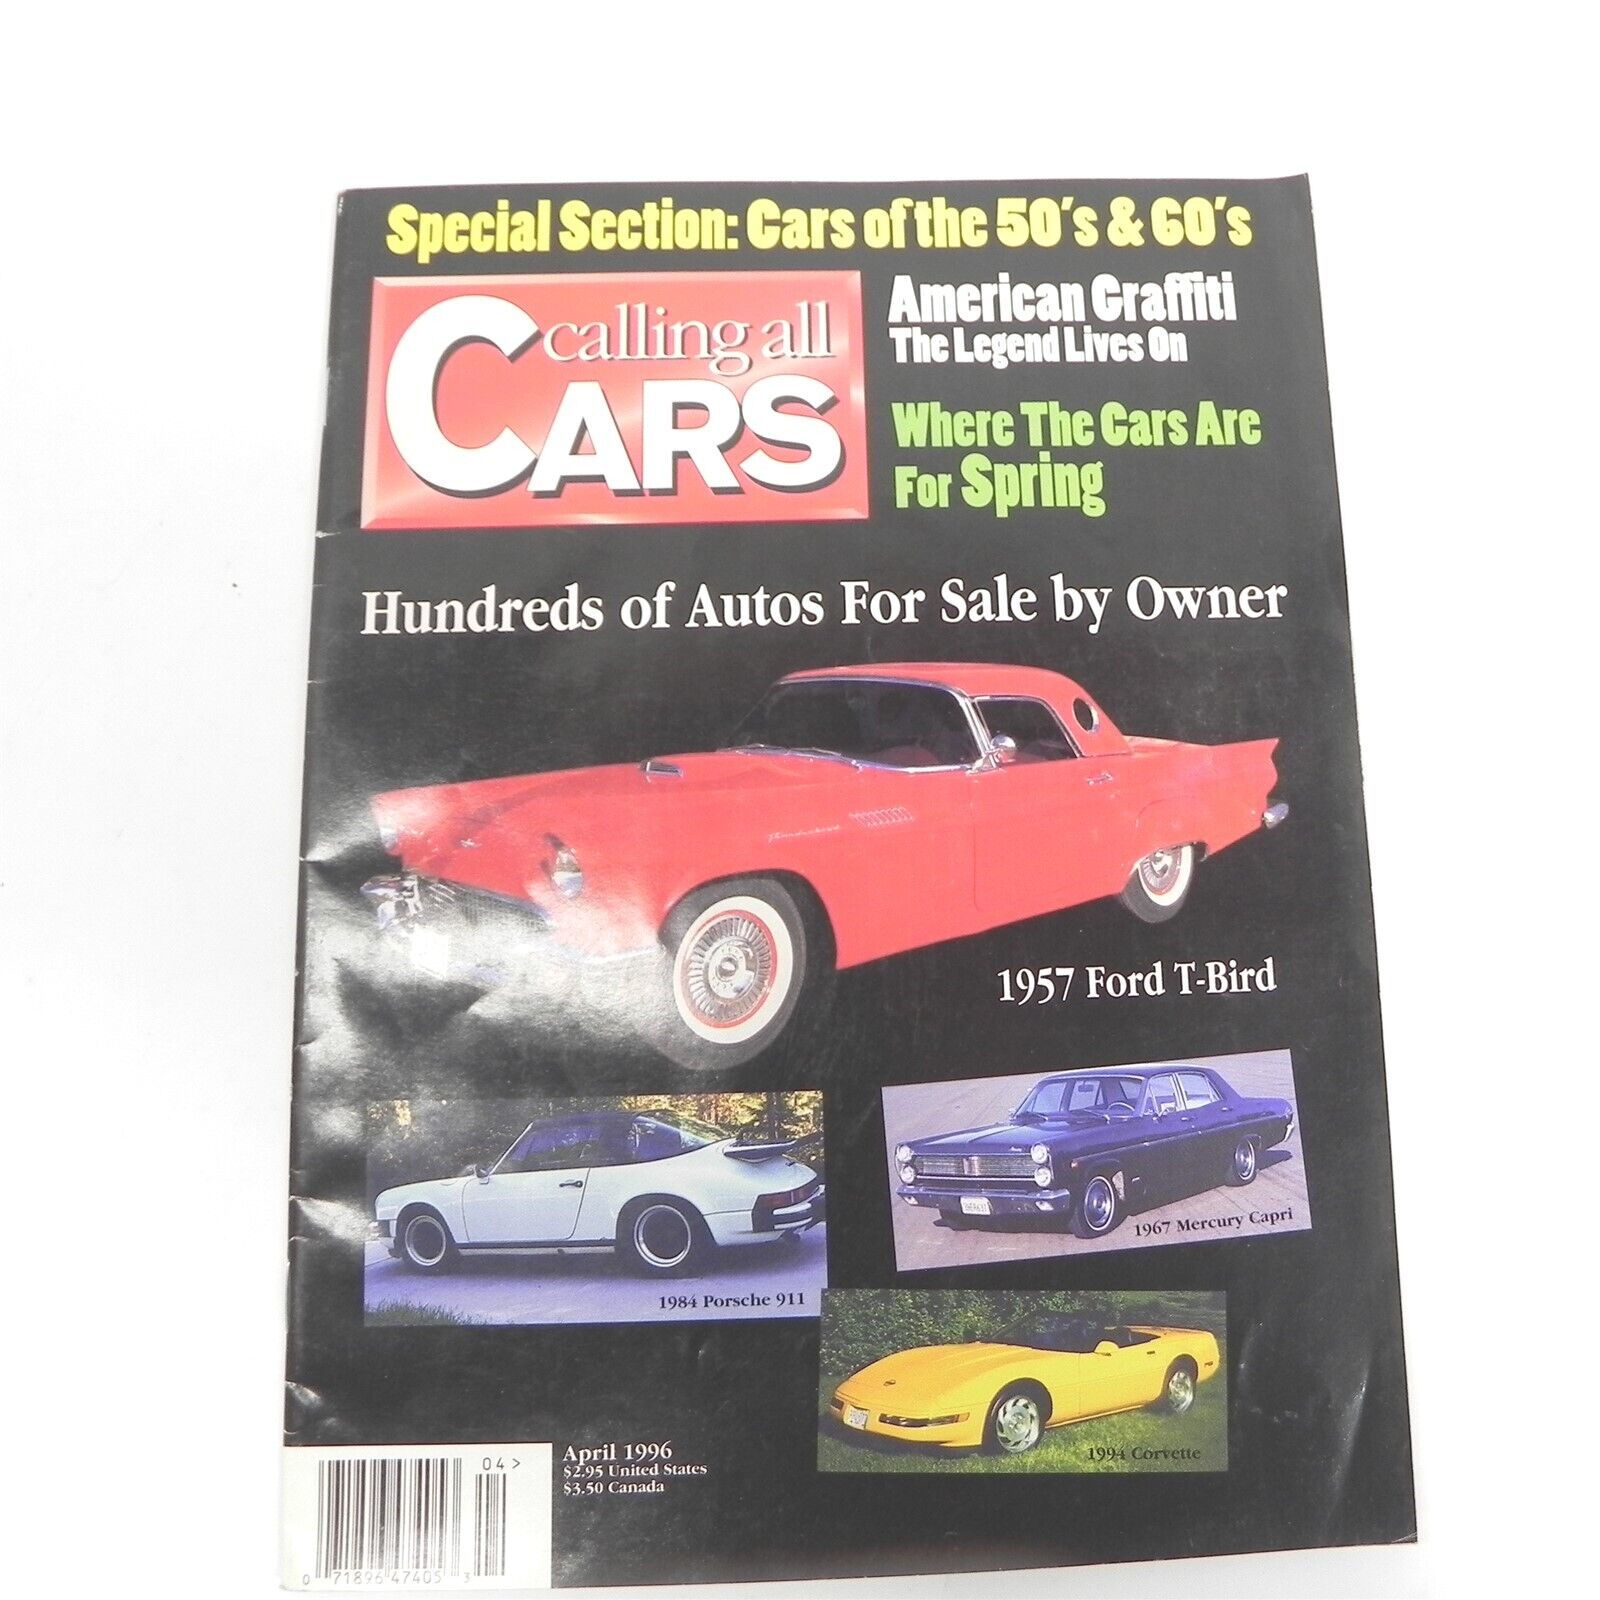 VINTAGE CALLING ALL CARS APRIL 1996 MAGAZINE CLASSIFIED ADS FOR HOT RODS MUSCLE